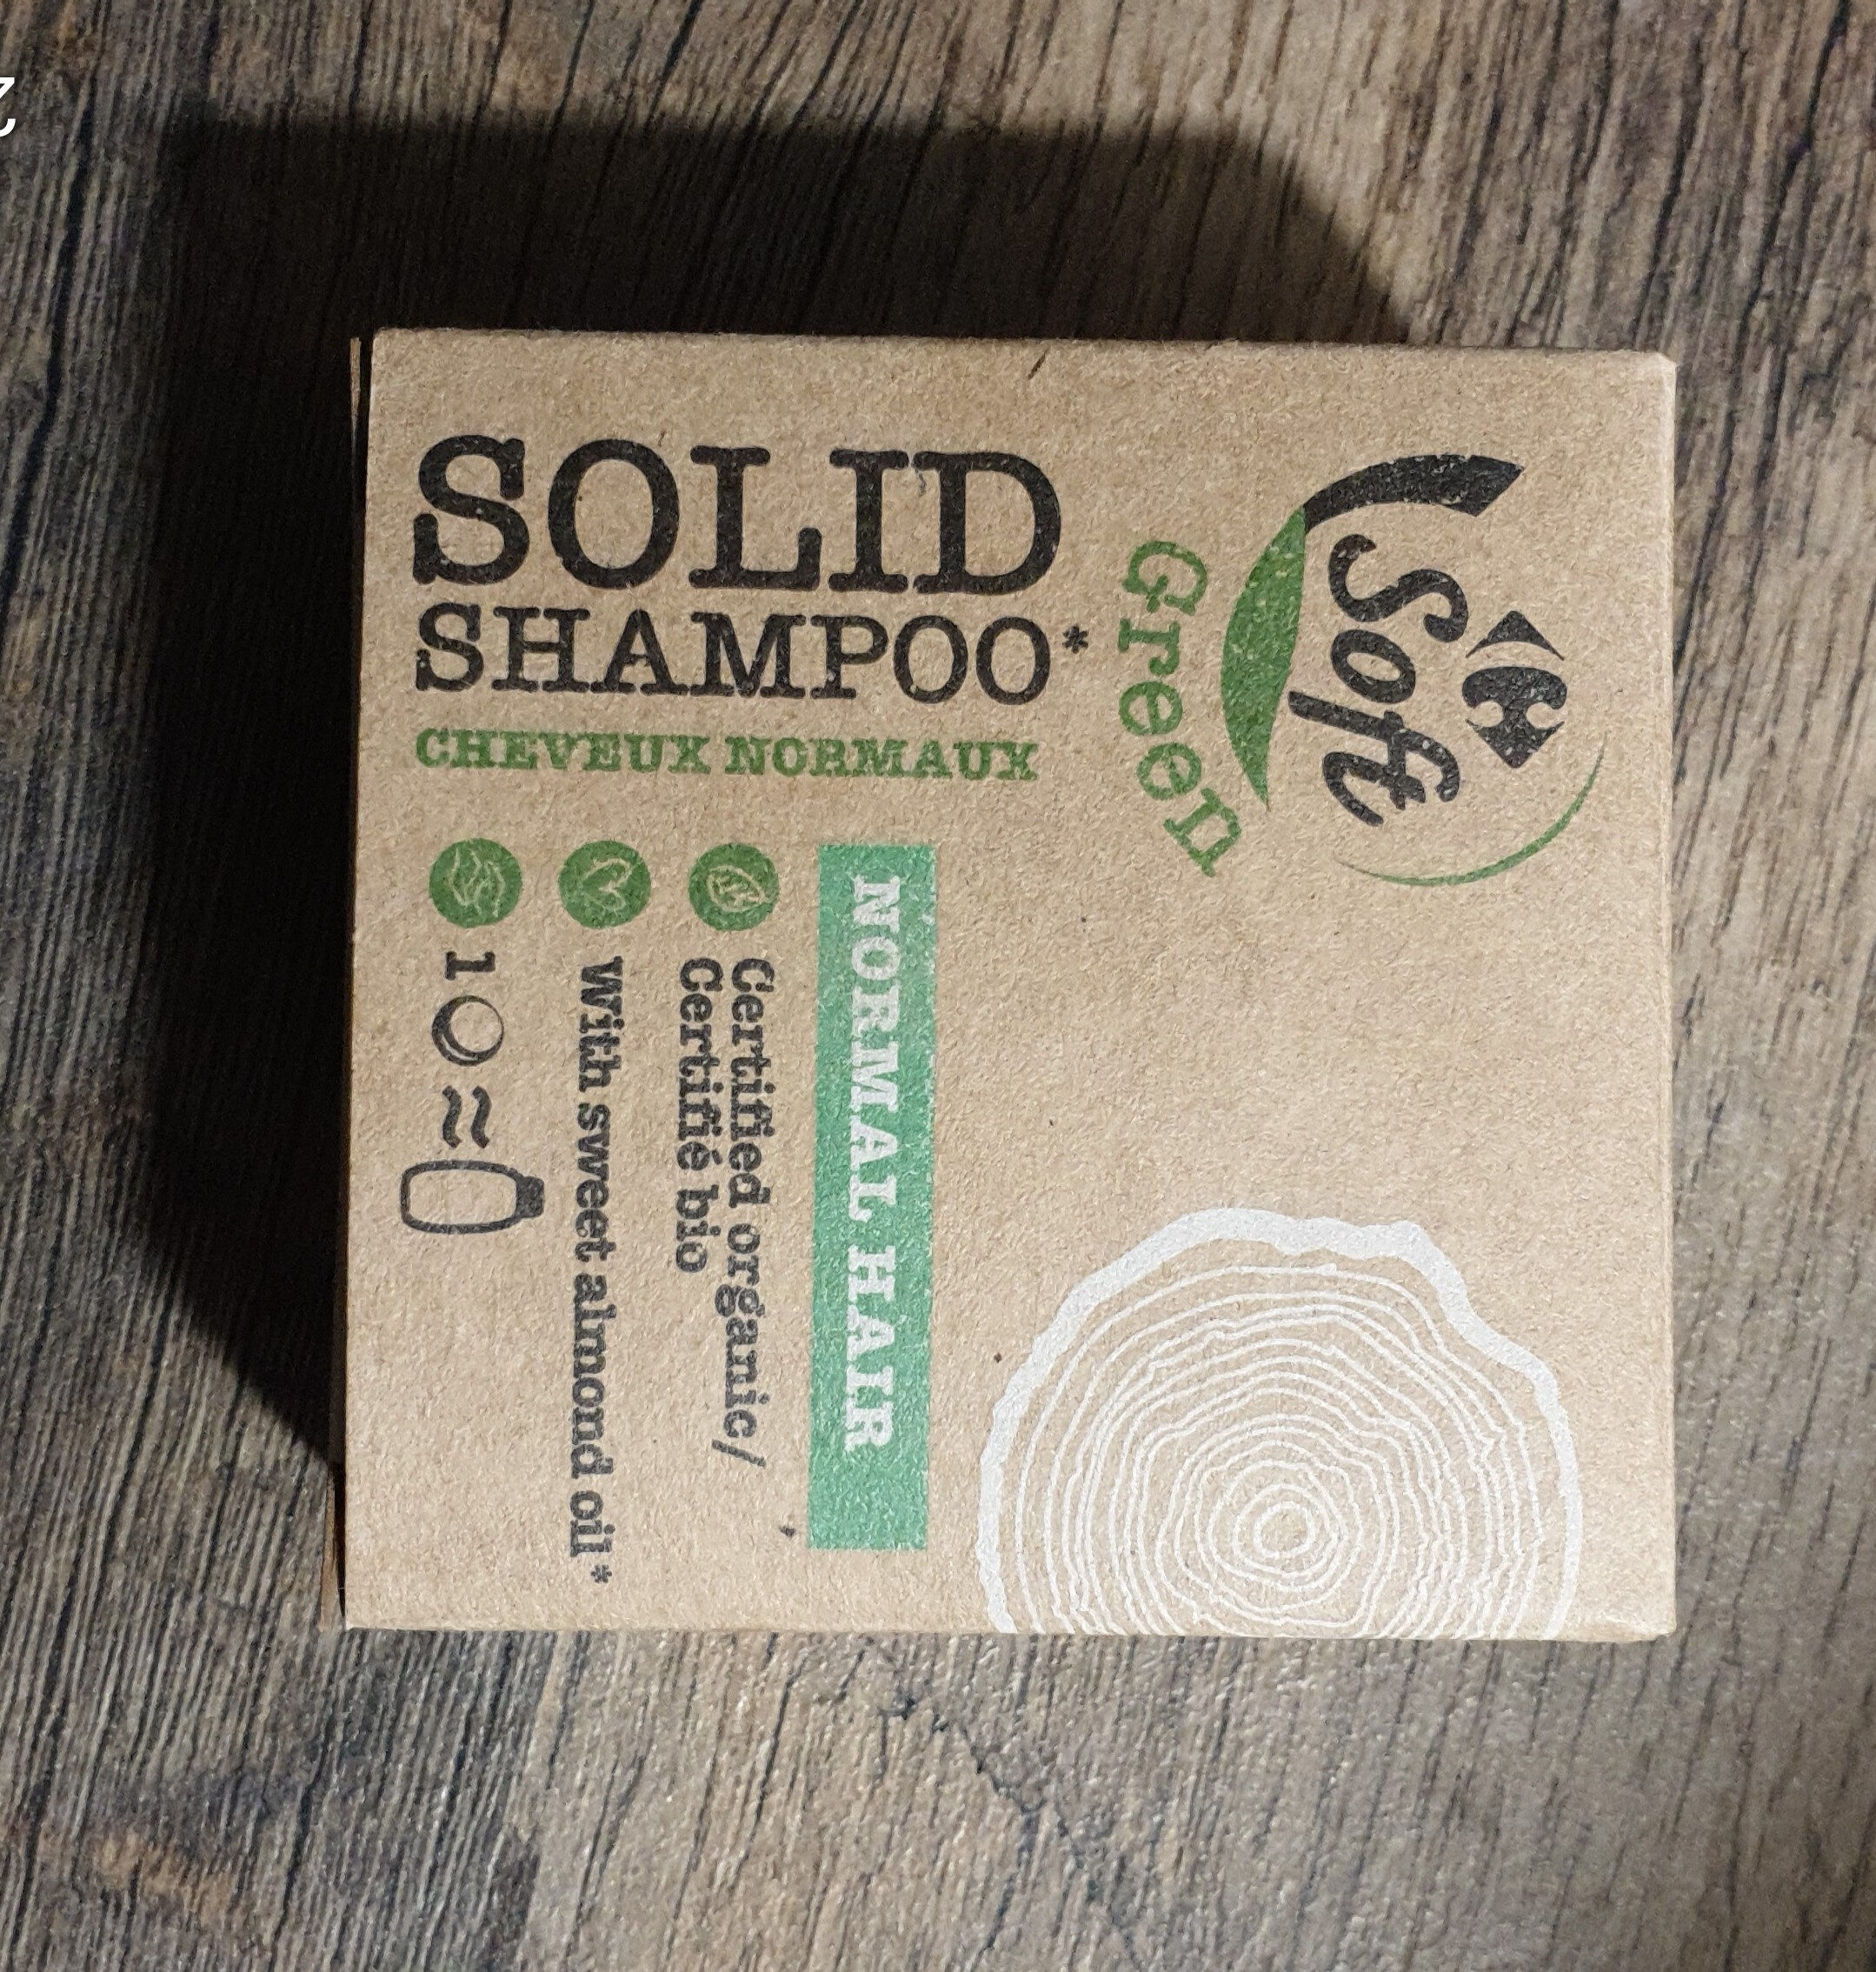 Solid SHAMPOO cheveux normaux - Produto - fr